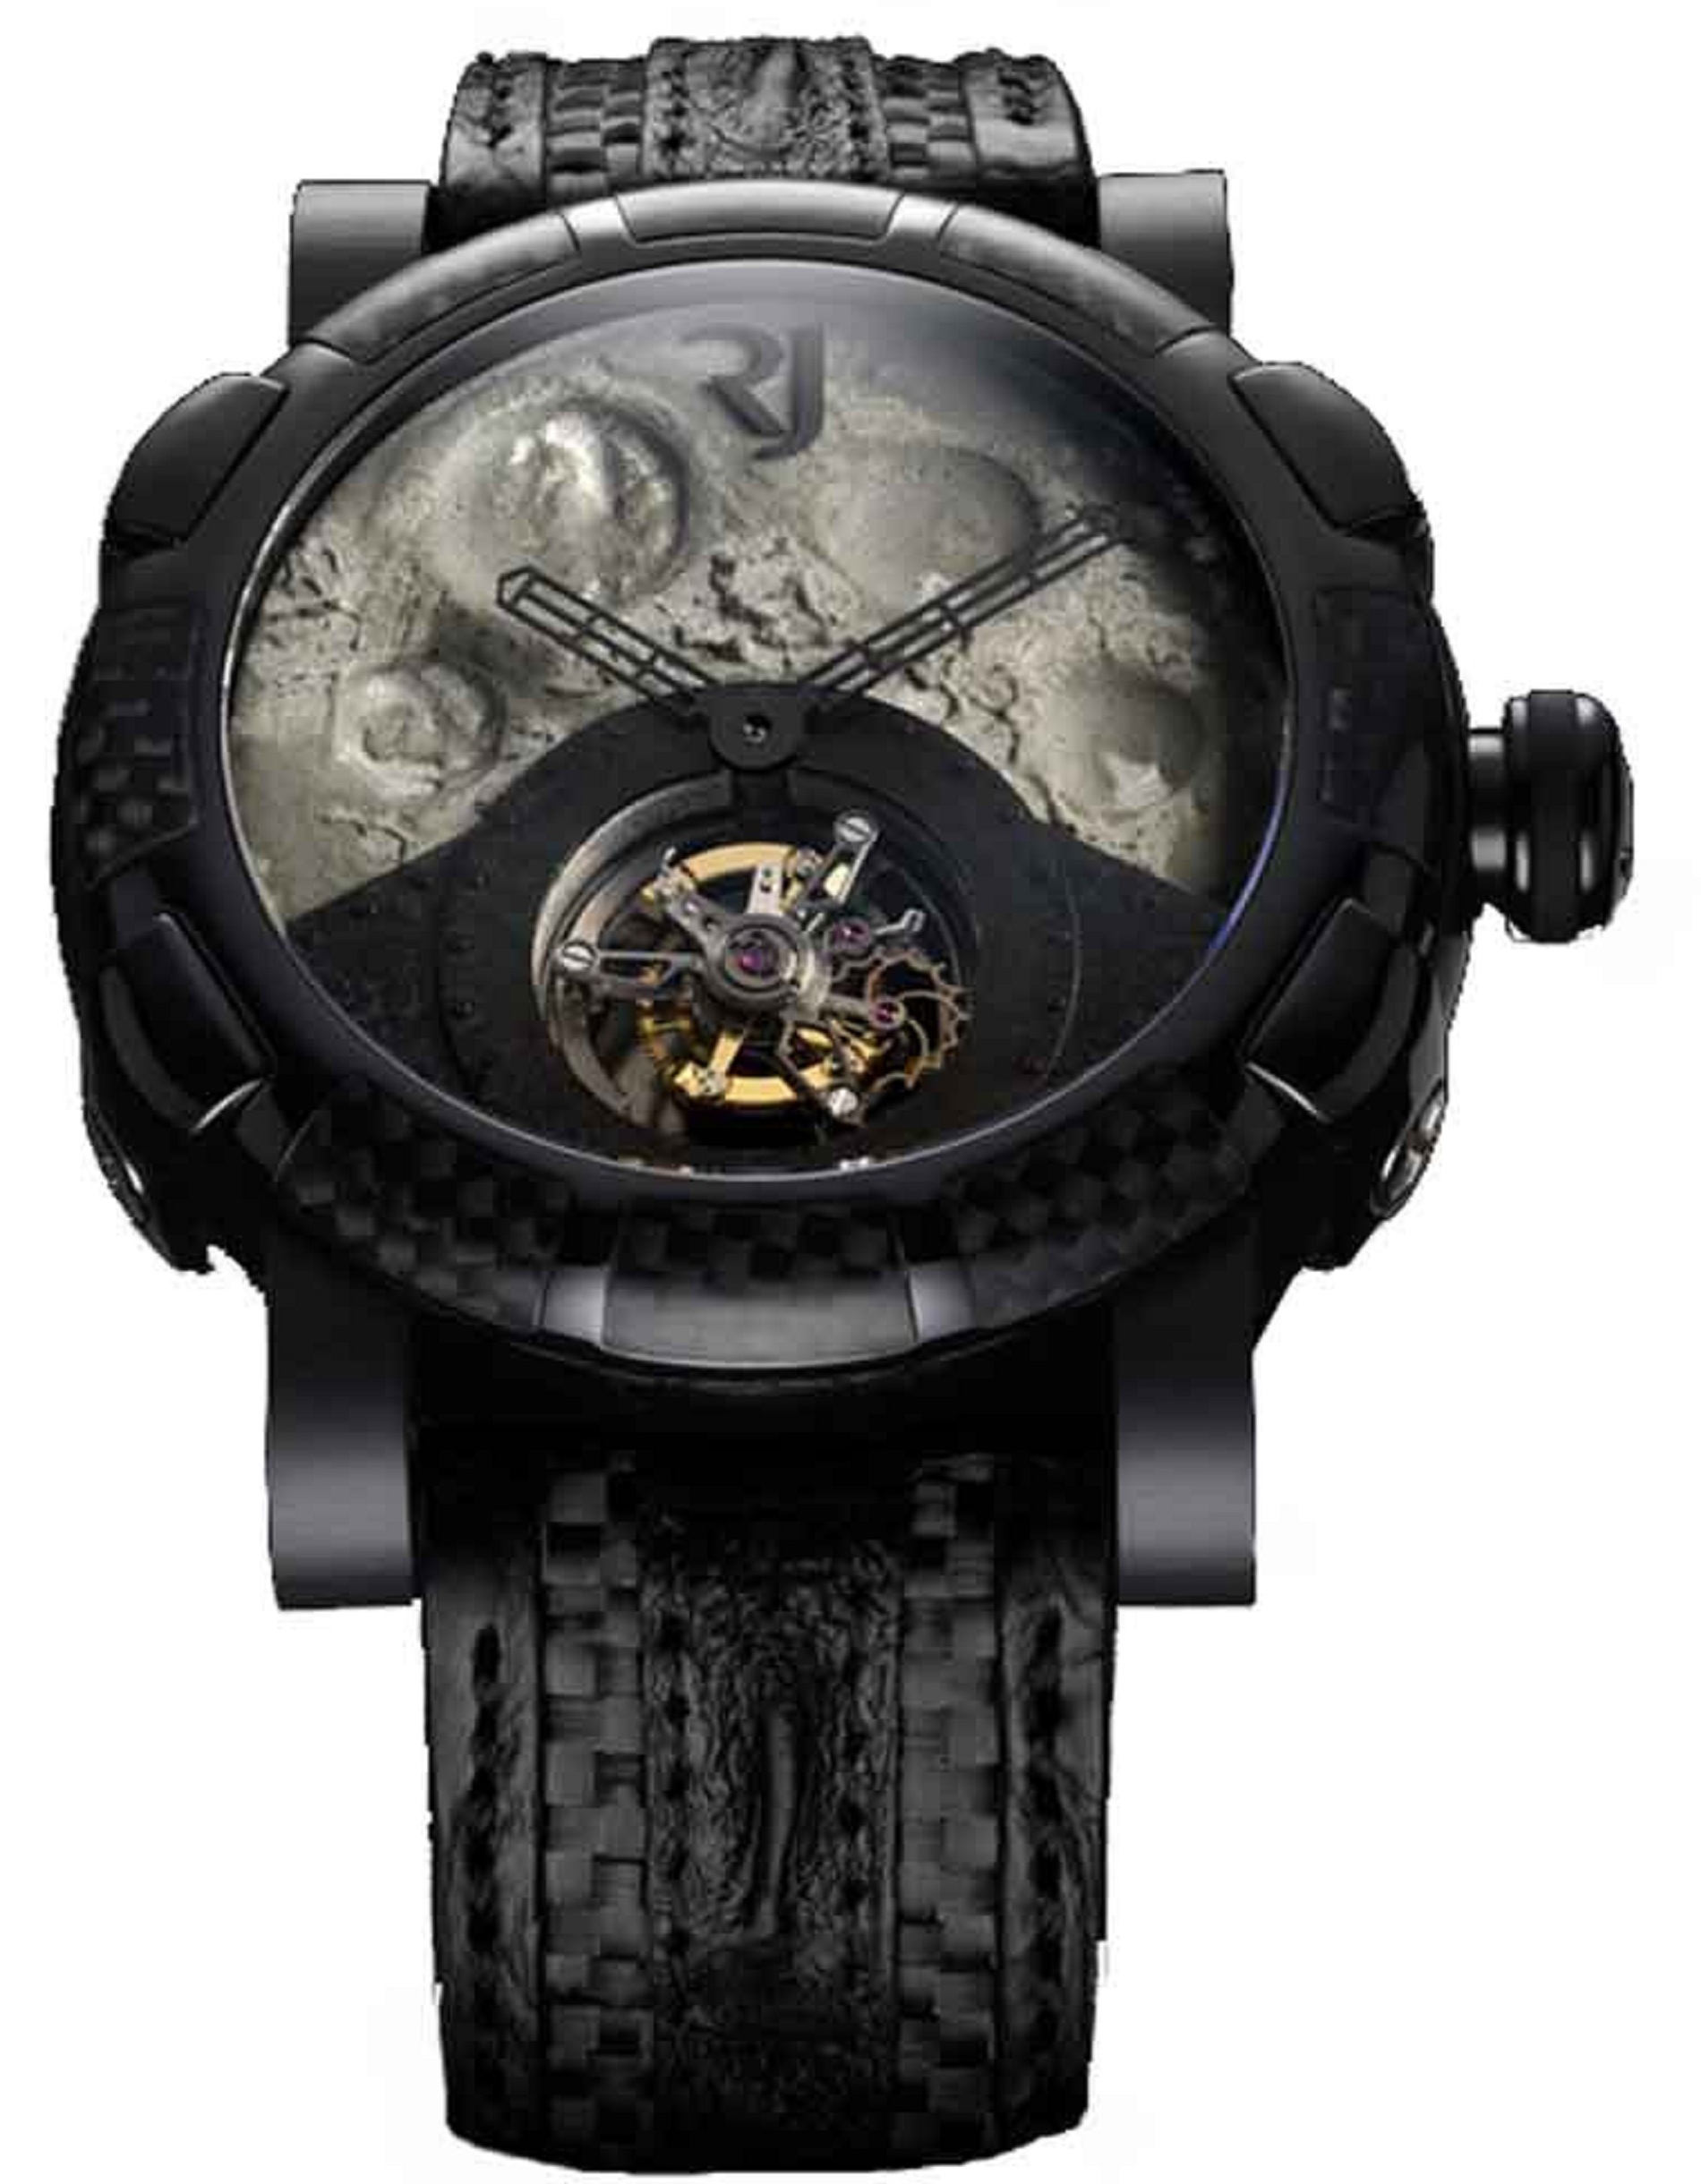 Moon Dust DNA Hannibal Lecter Tourbillon in Black PVD Steel on Black Leather Strap with Grey Dial